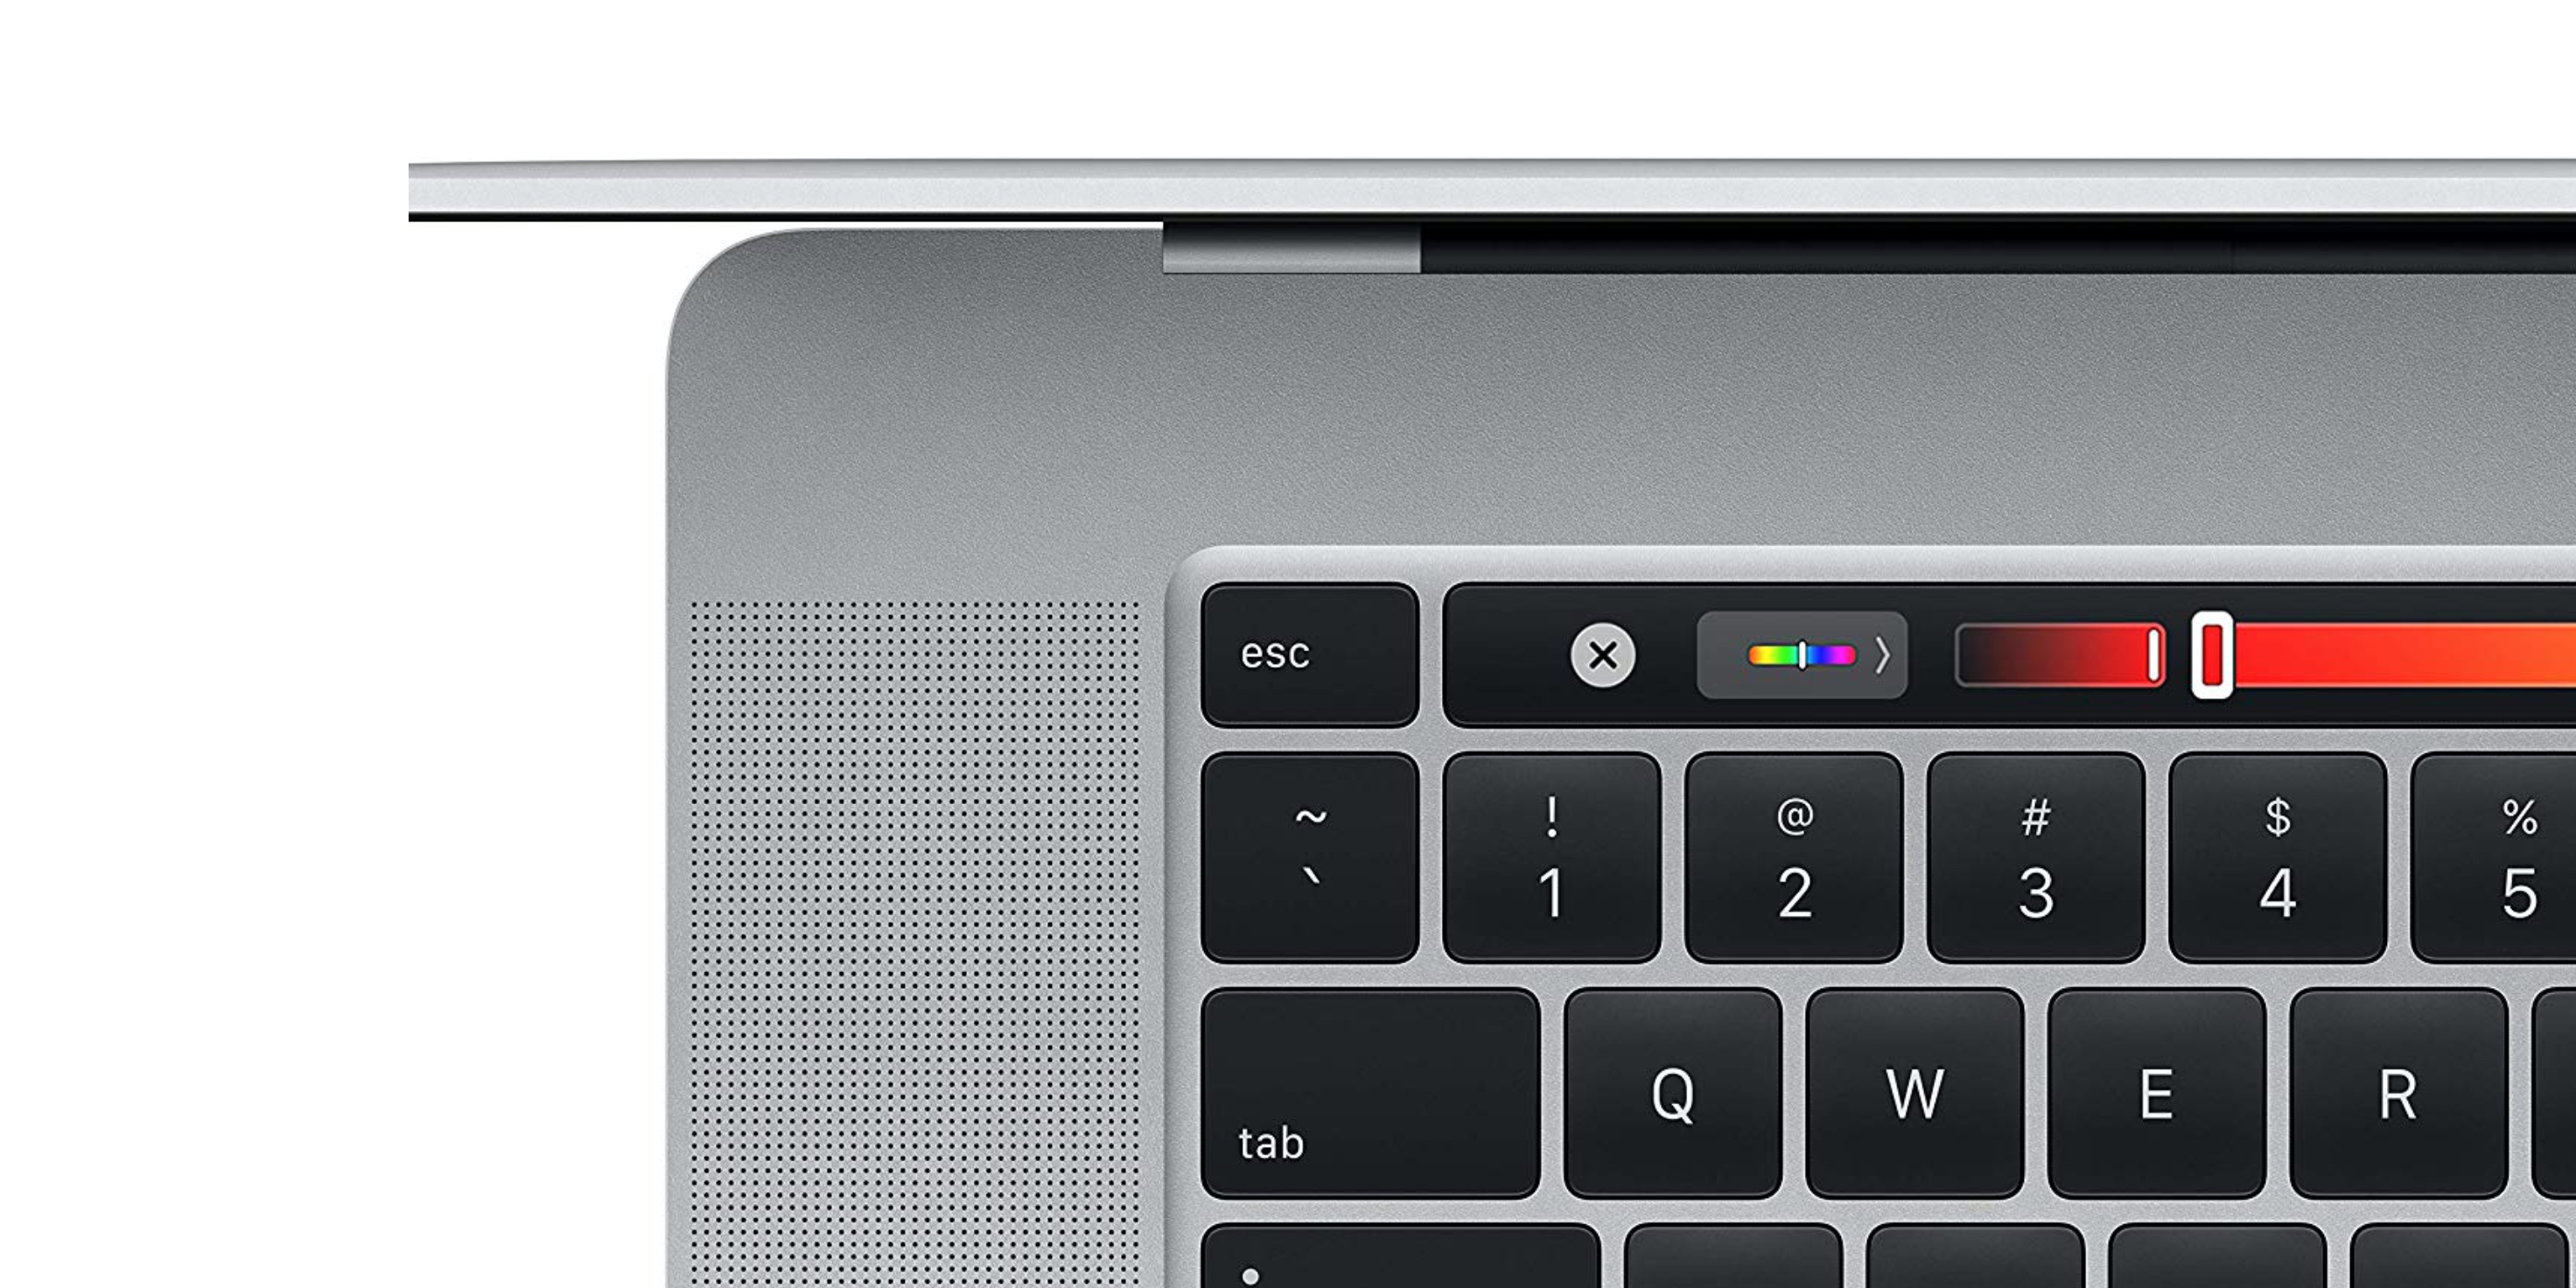 2019 Apple MacBook Air to get new scissor switch keyboard design: Ming-Chi  Kuo